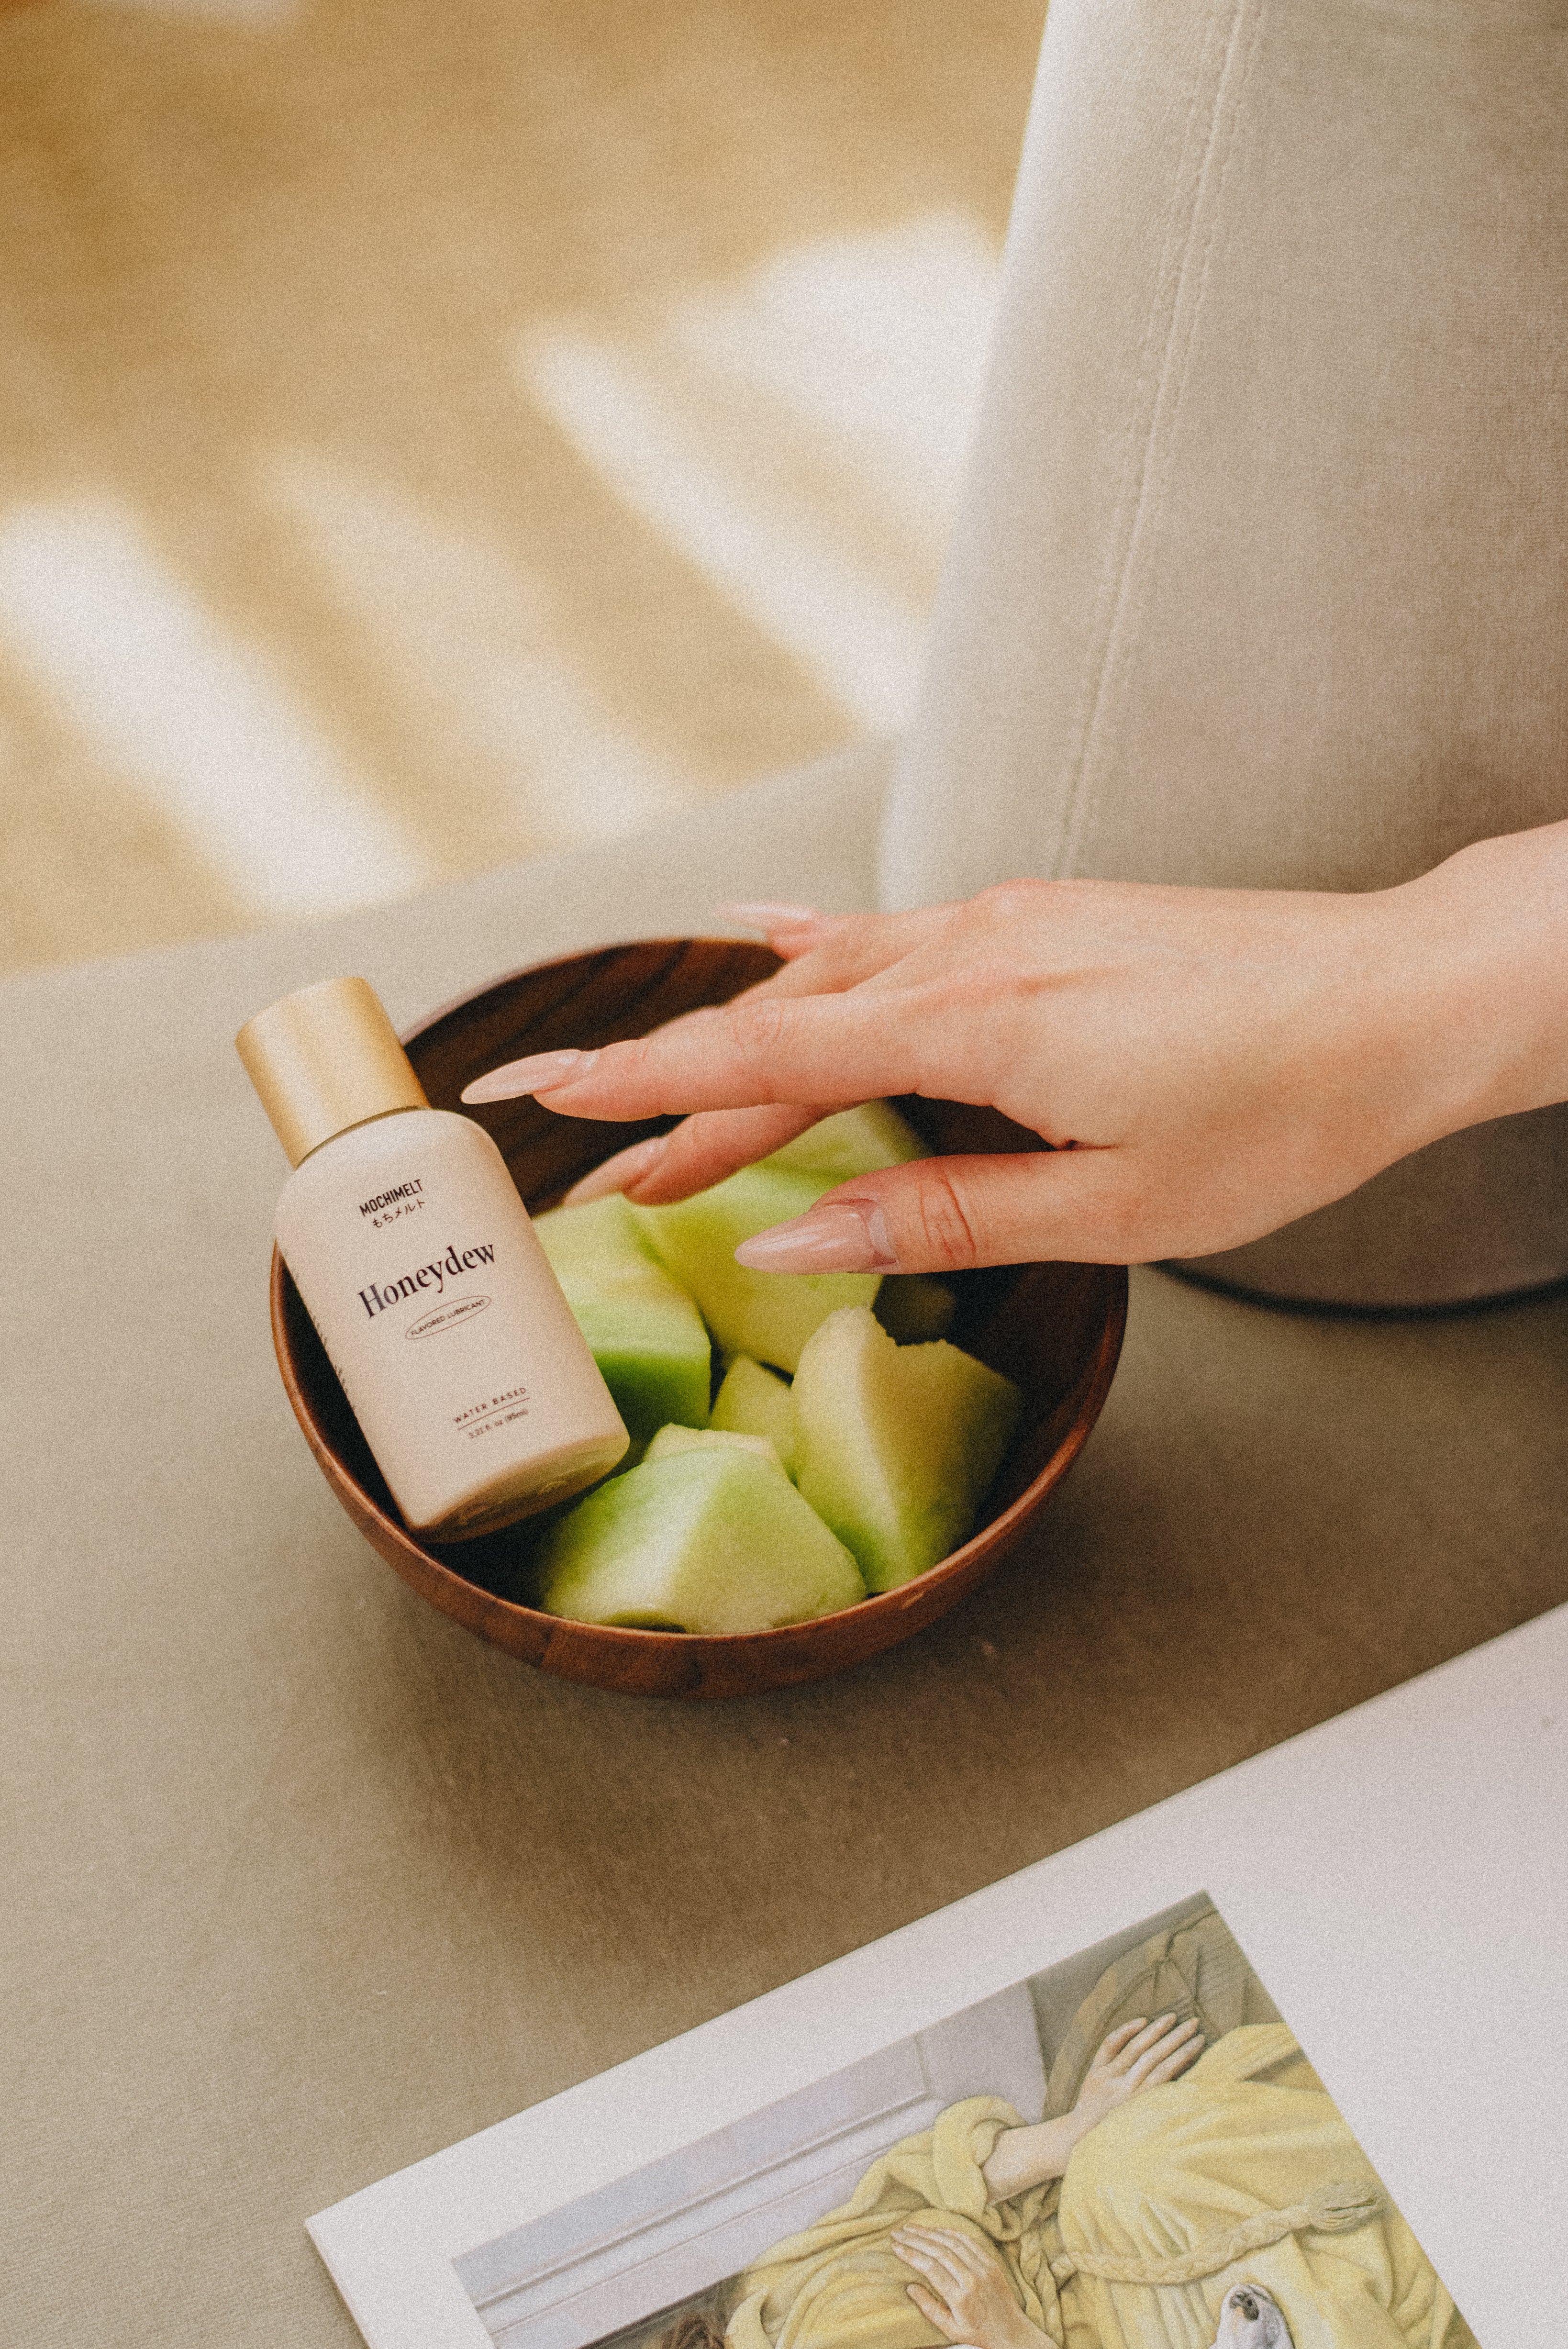 Woman's well-manicured hand reaching for Honeydew fruit and Mochi Melt honeydew flavored lubricant in a wooden bowl